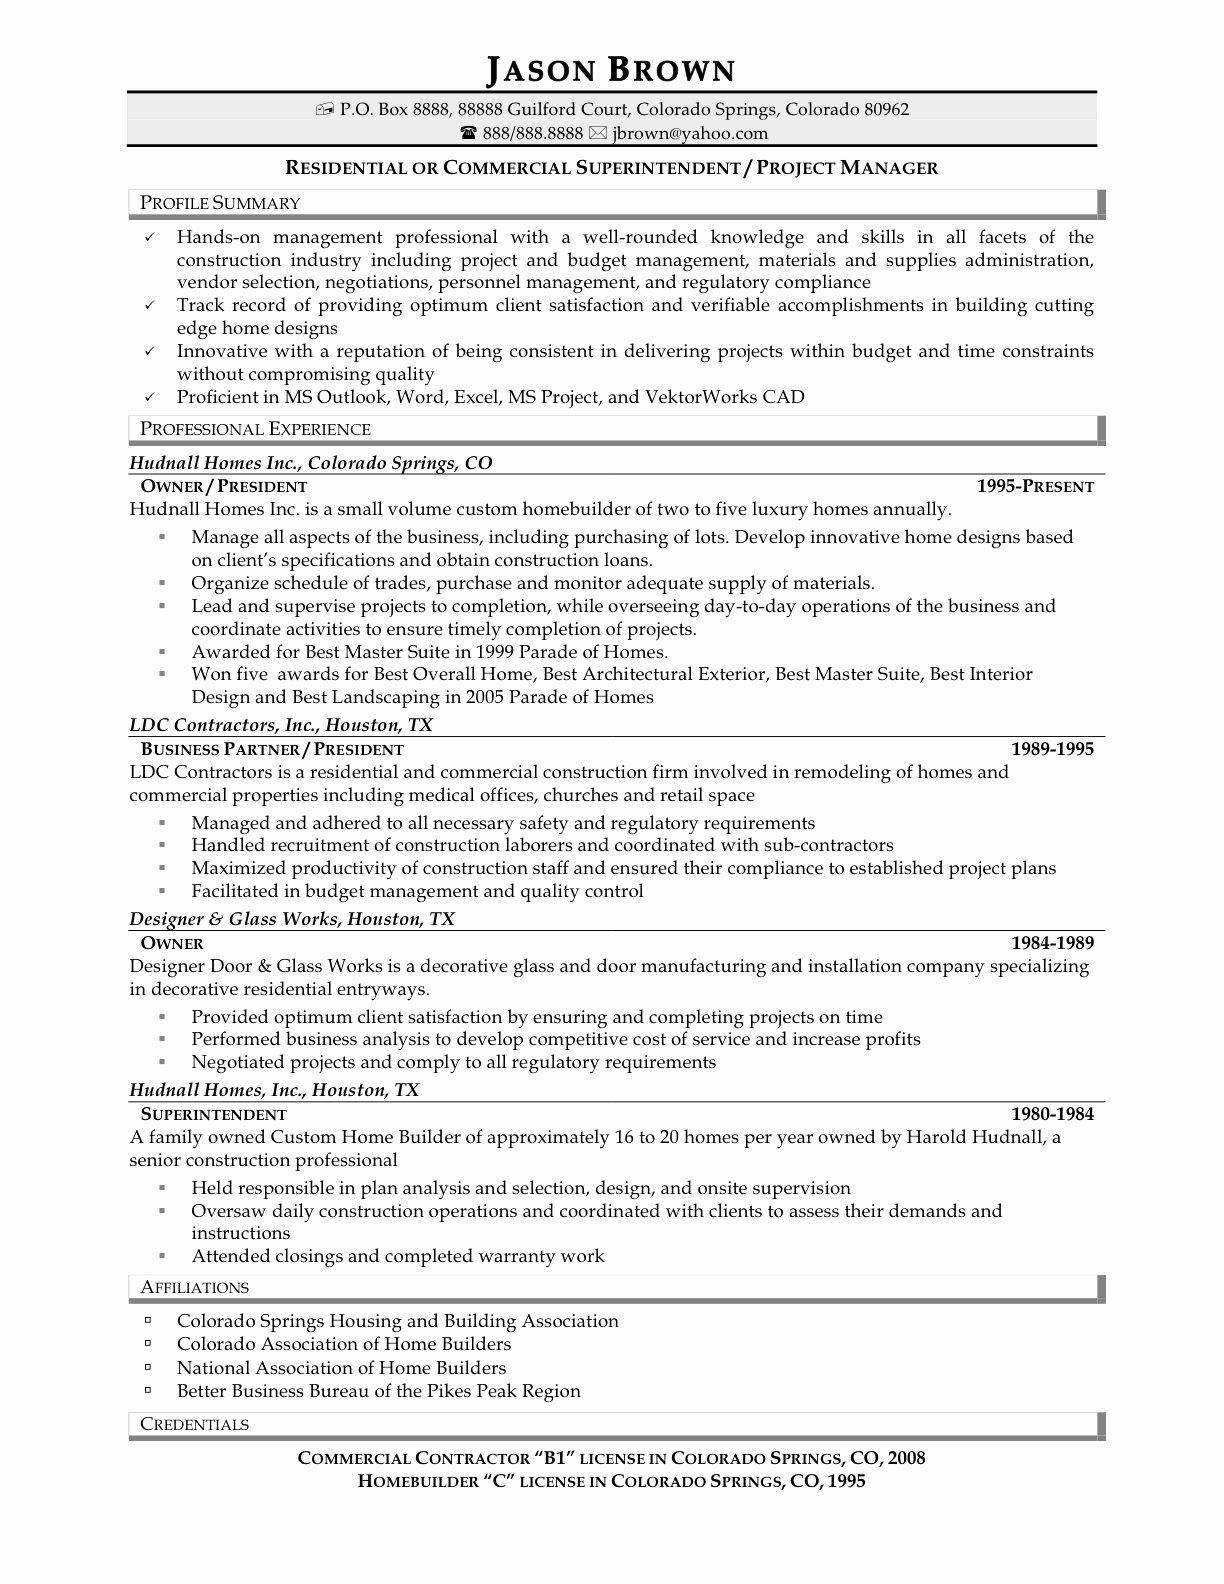 Project Manager Resume Sample Doc New Construction Project Manager Resume Sample Doc